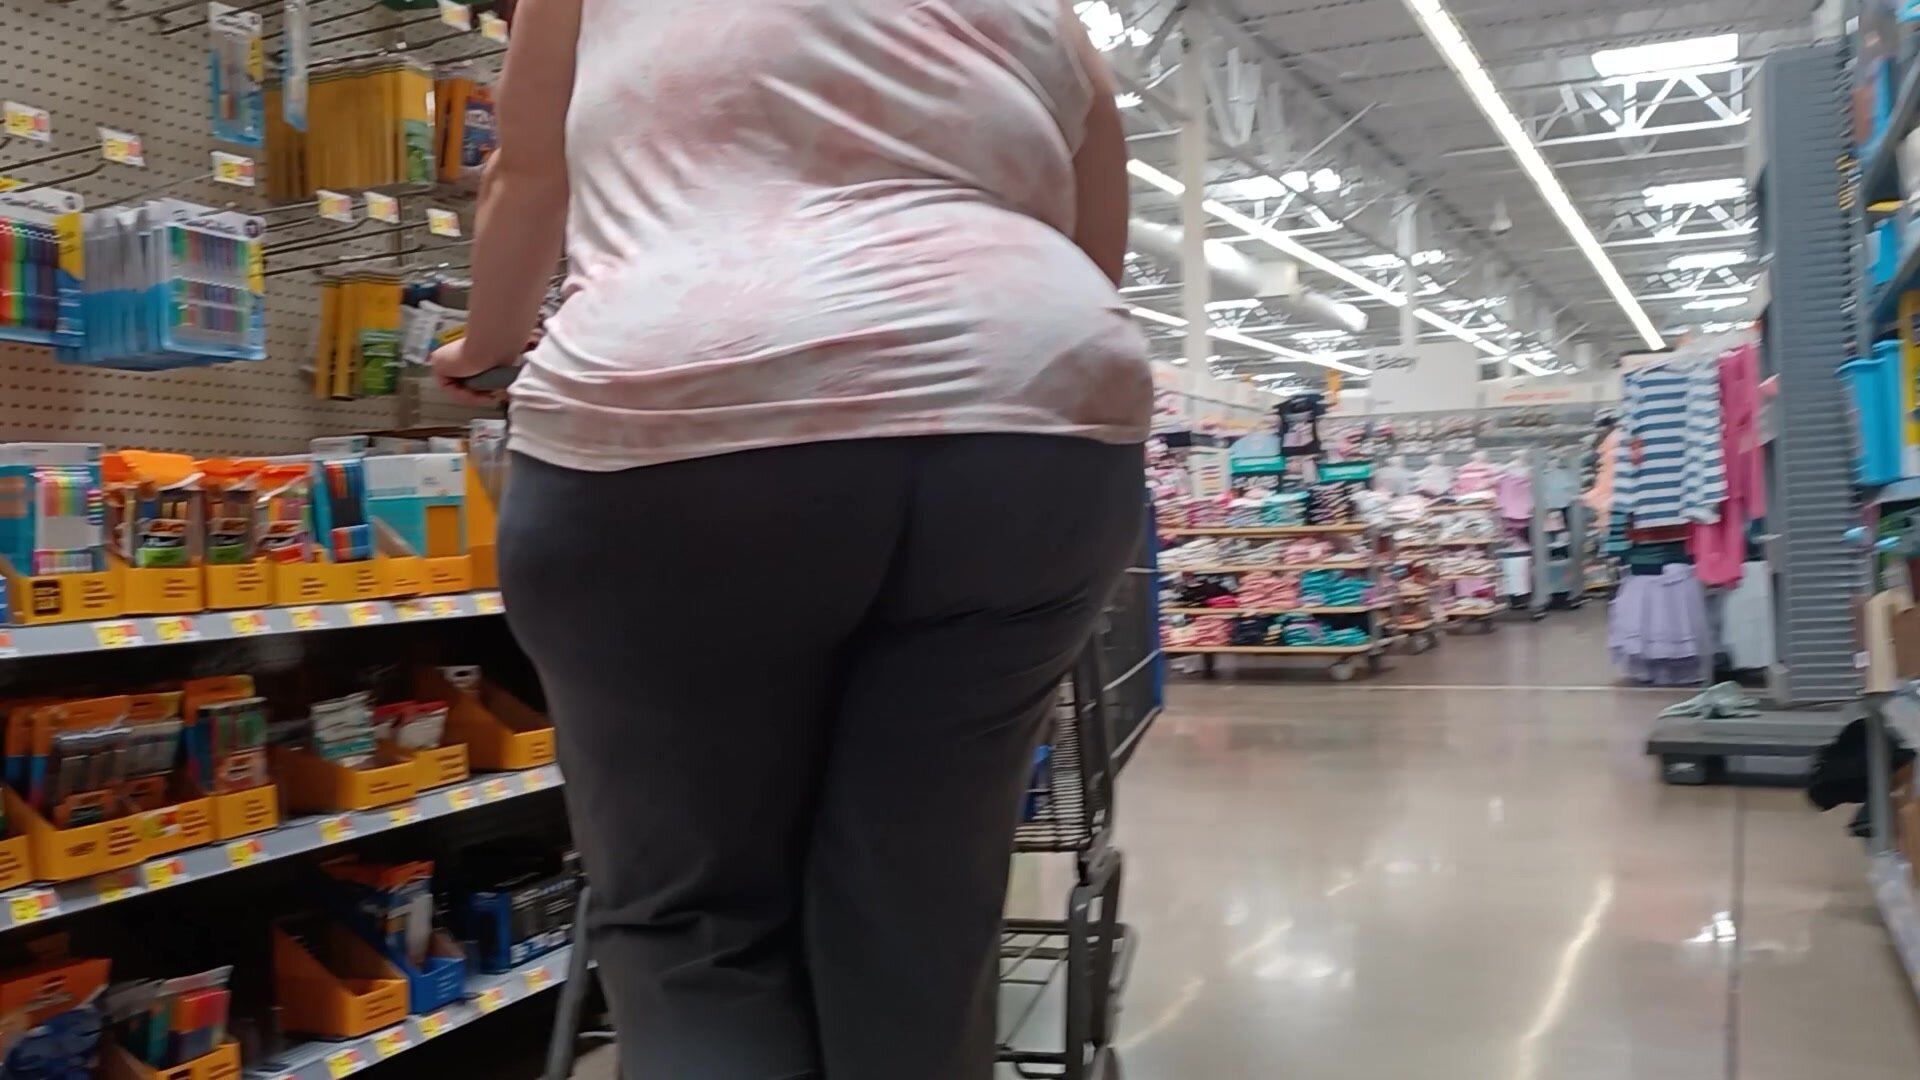 That shirt can't cover that ass